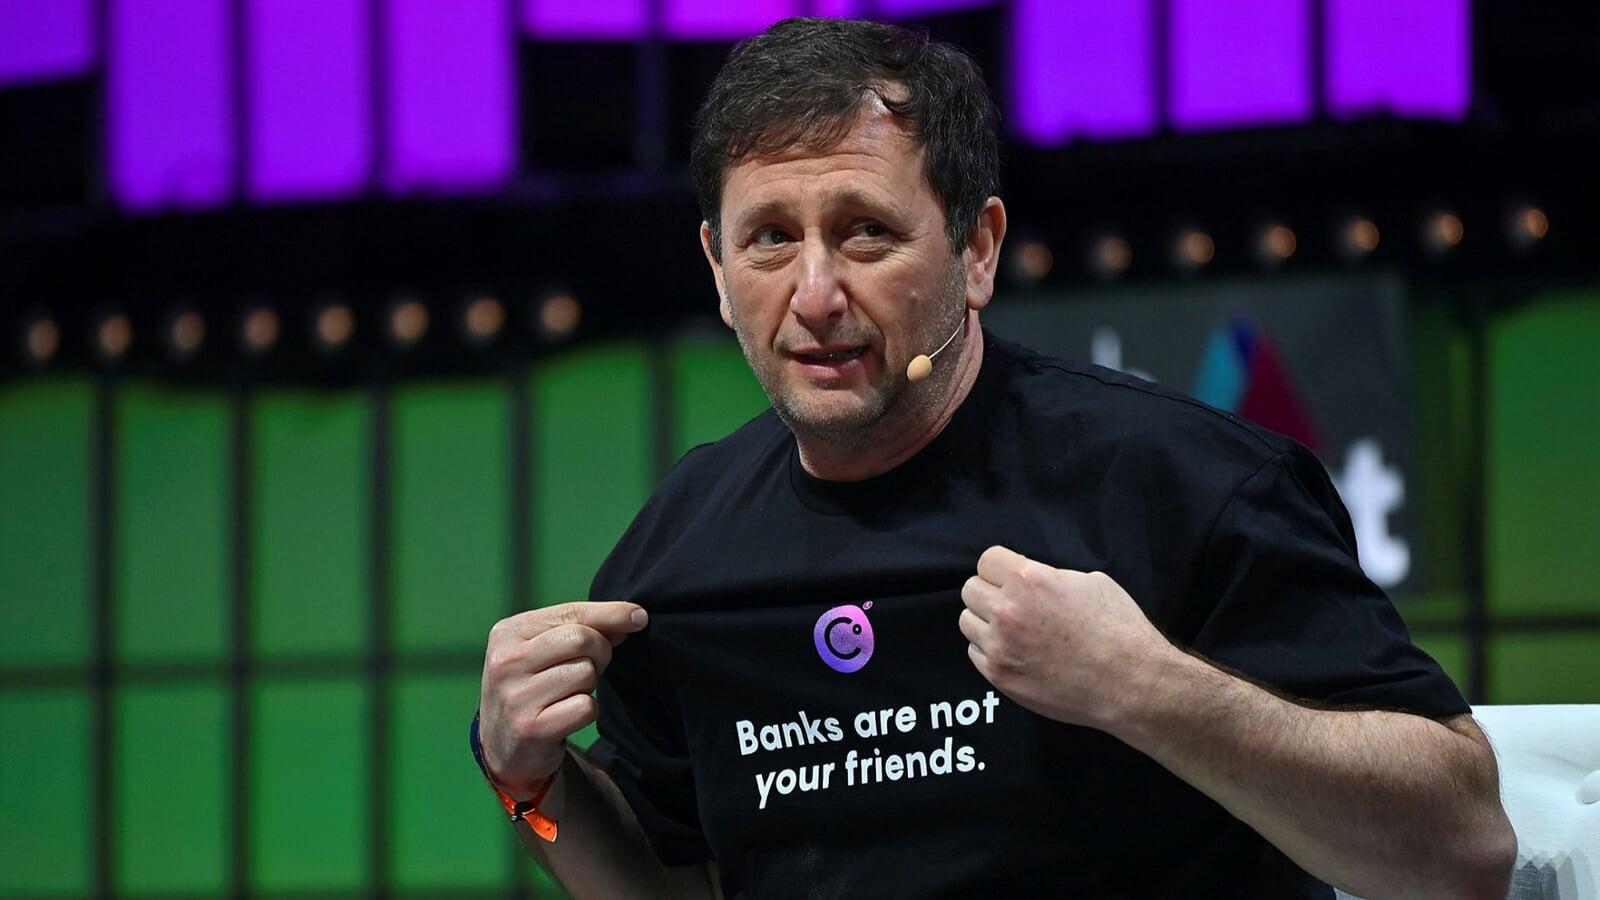 Celsius CEO, Alex Mashinsky wearing a shirt that says banks are not your friends